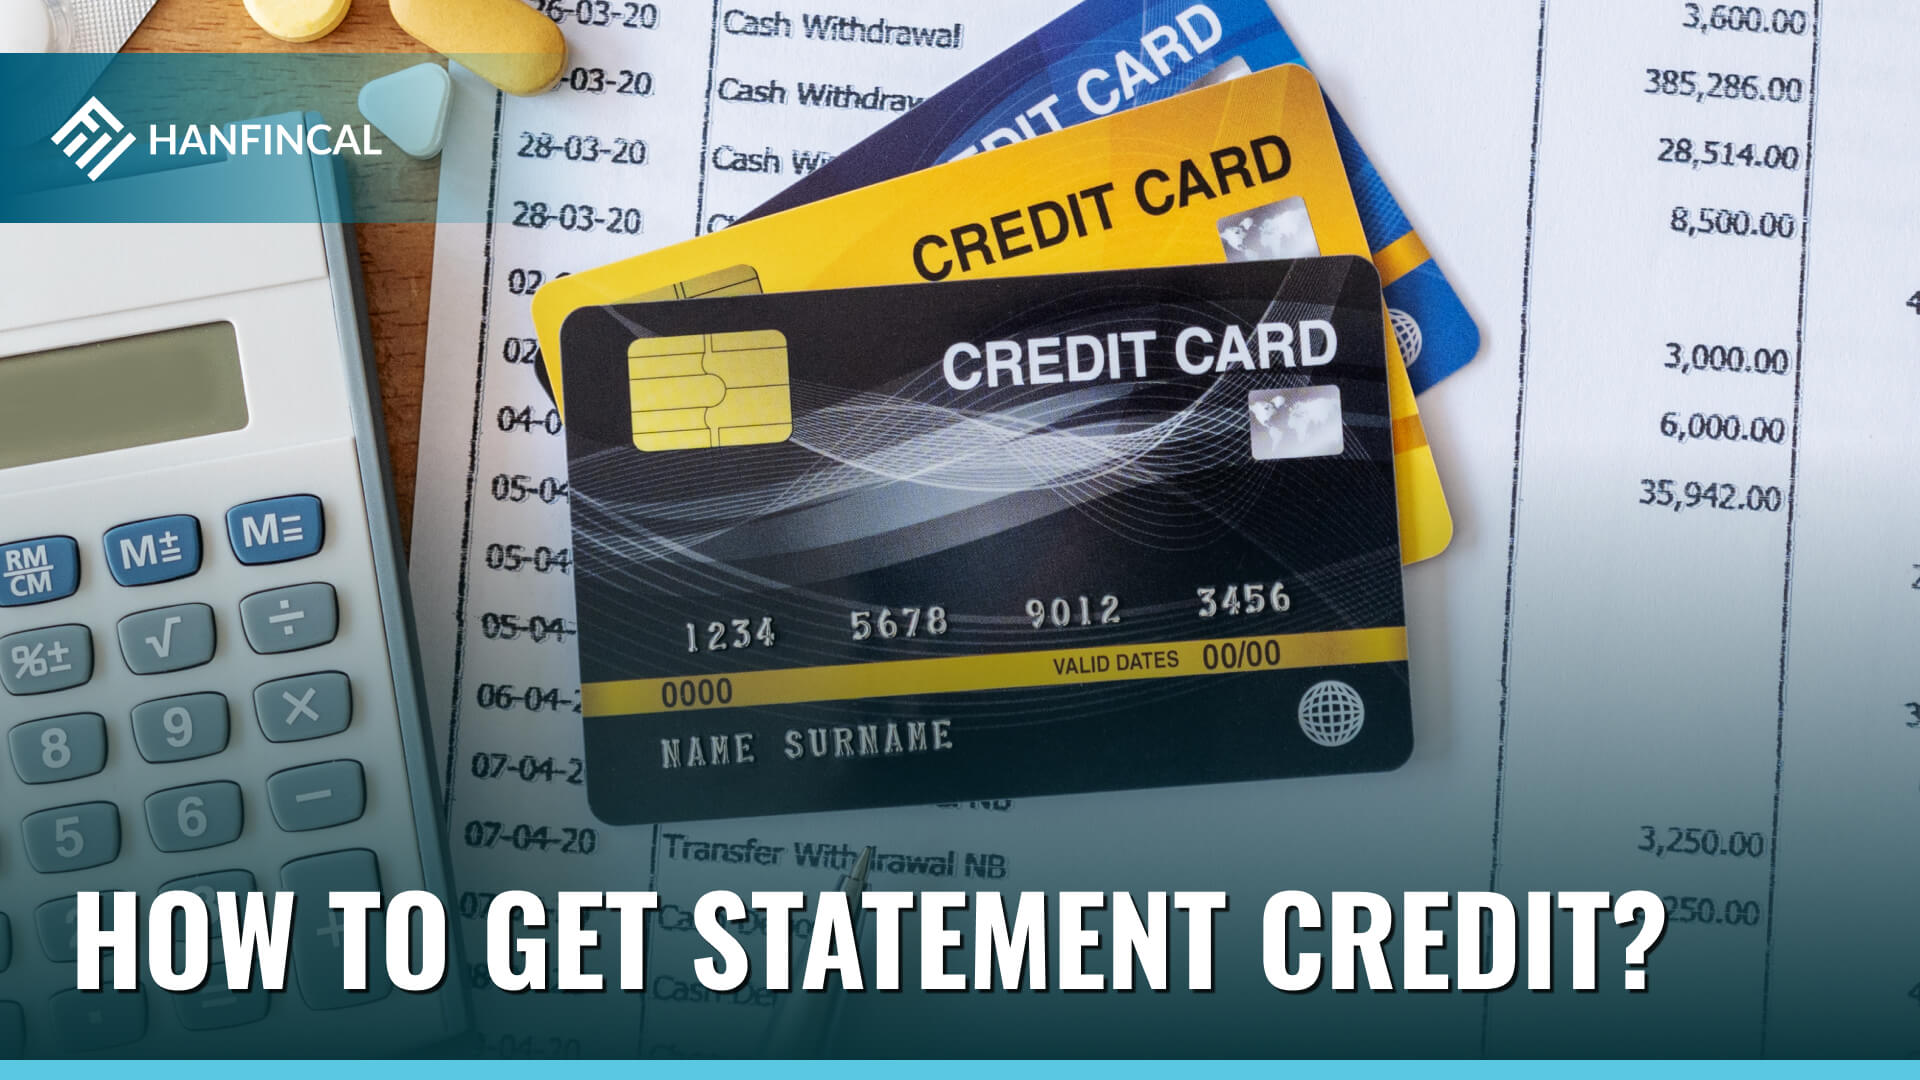 How to get statement credit?